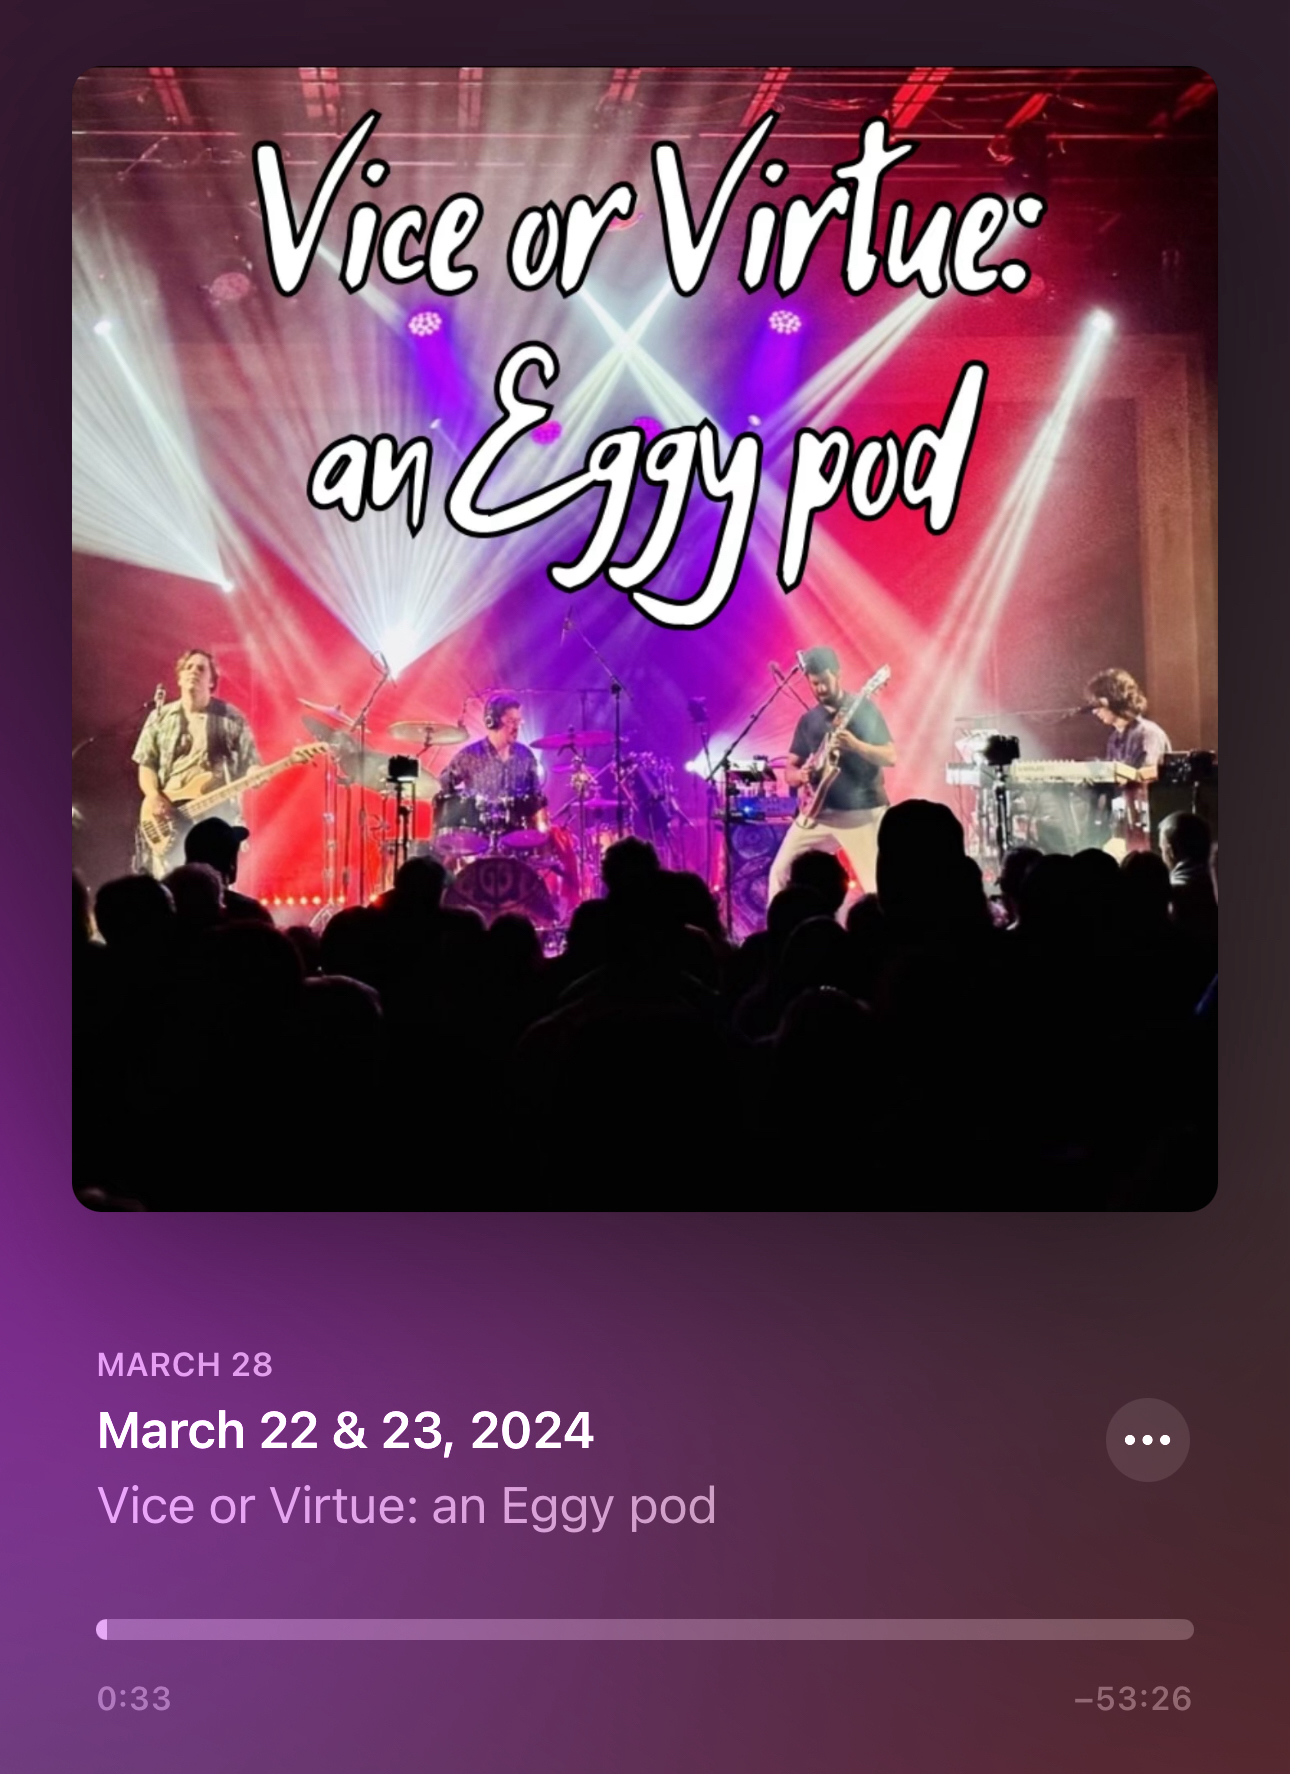 A screenshot of a podcast episode titled “Vice or Virtue: an Eggy pod” from March 22 & 23, 2024, featuring a live band performance with colorful stage lighting and a crowd of people watching.